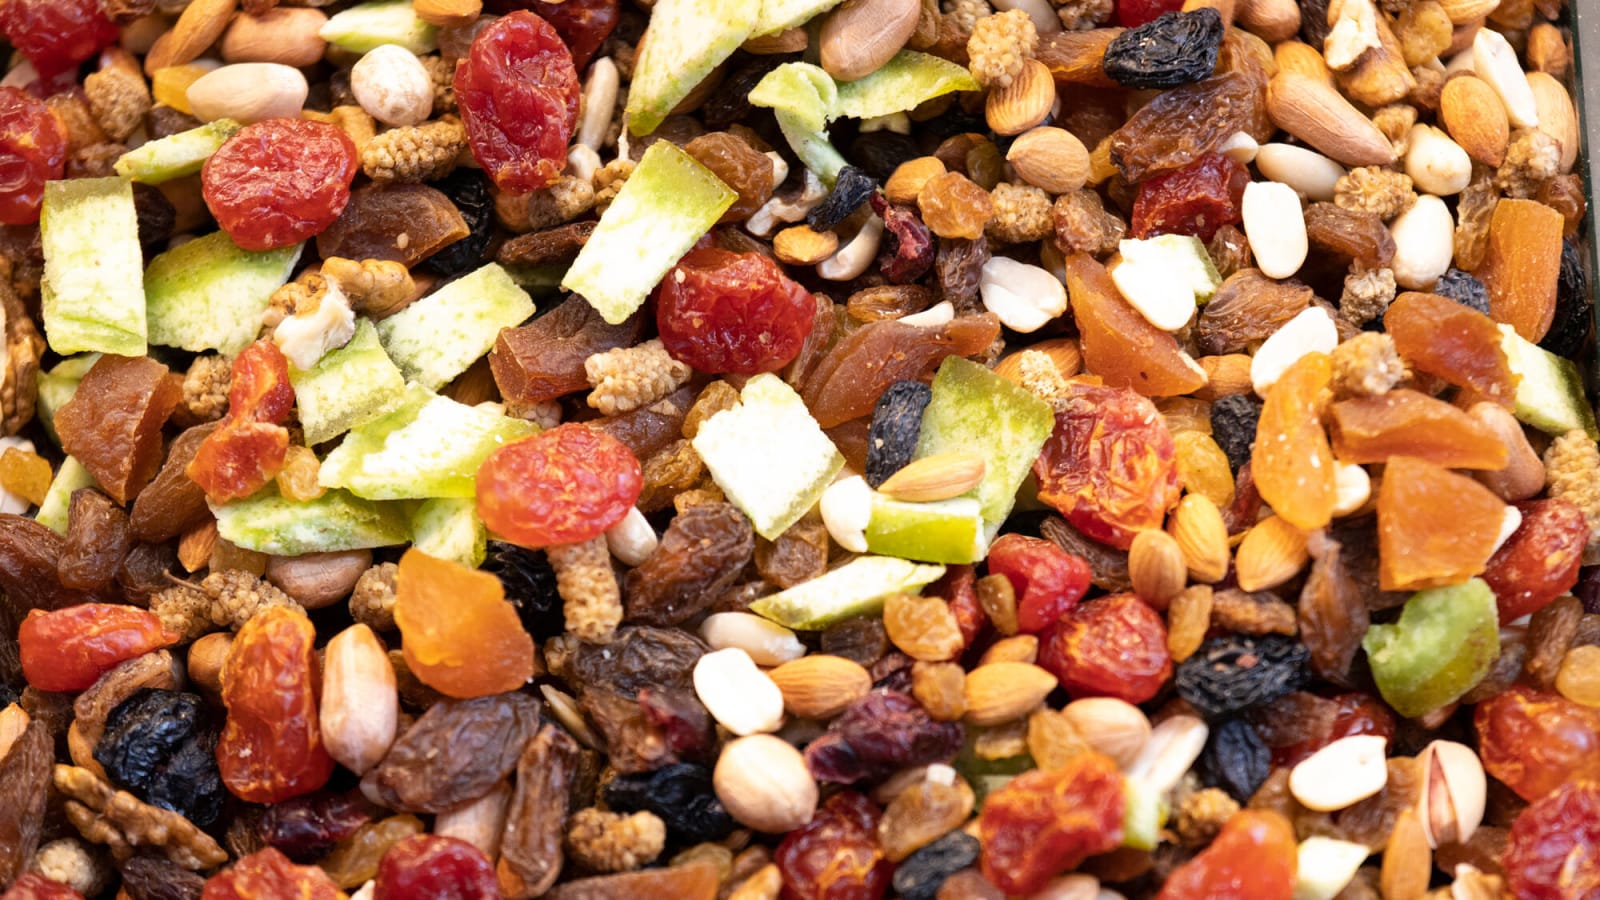 Our 20 favorite trail mix ingredients